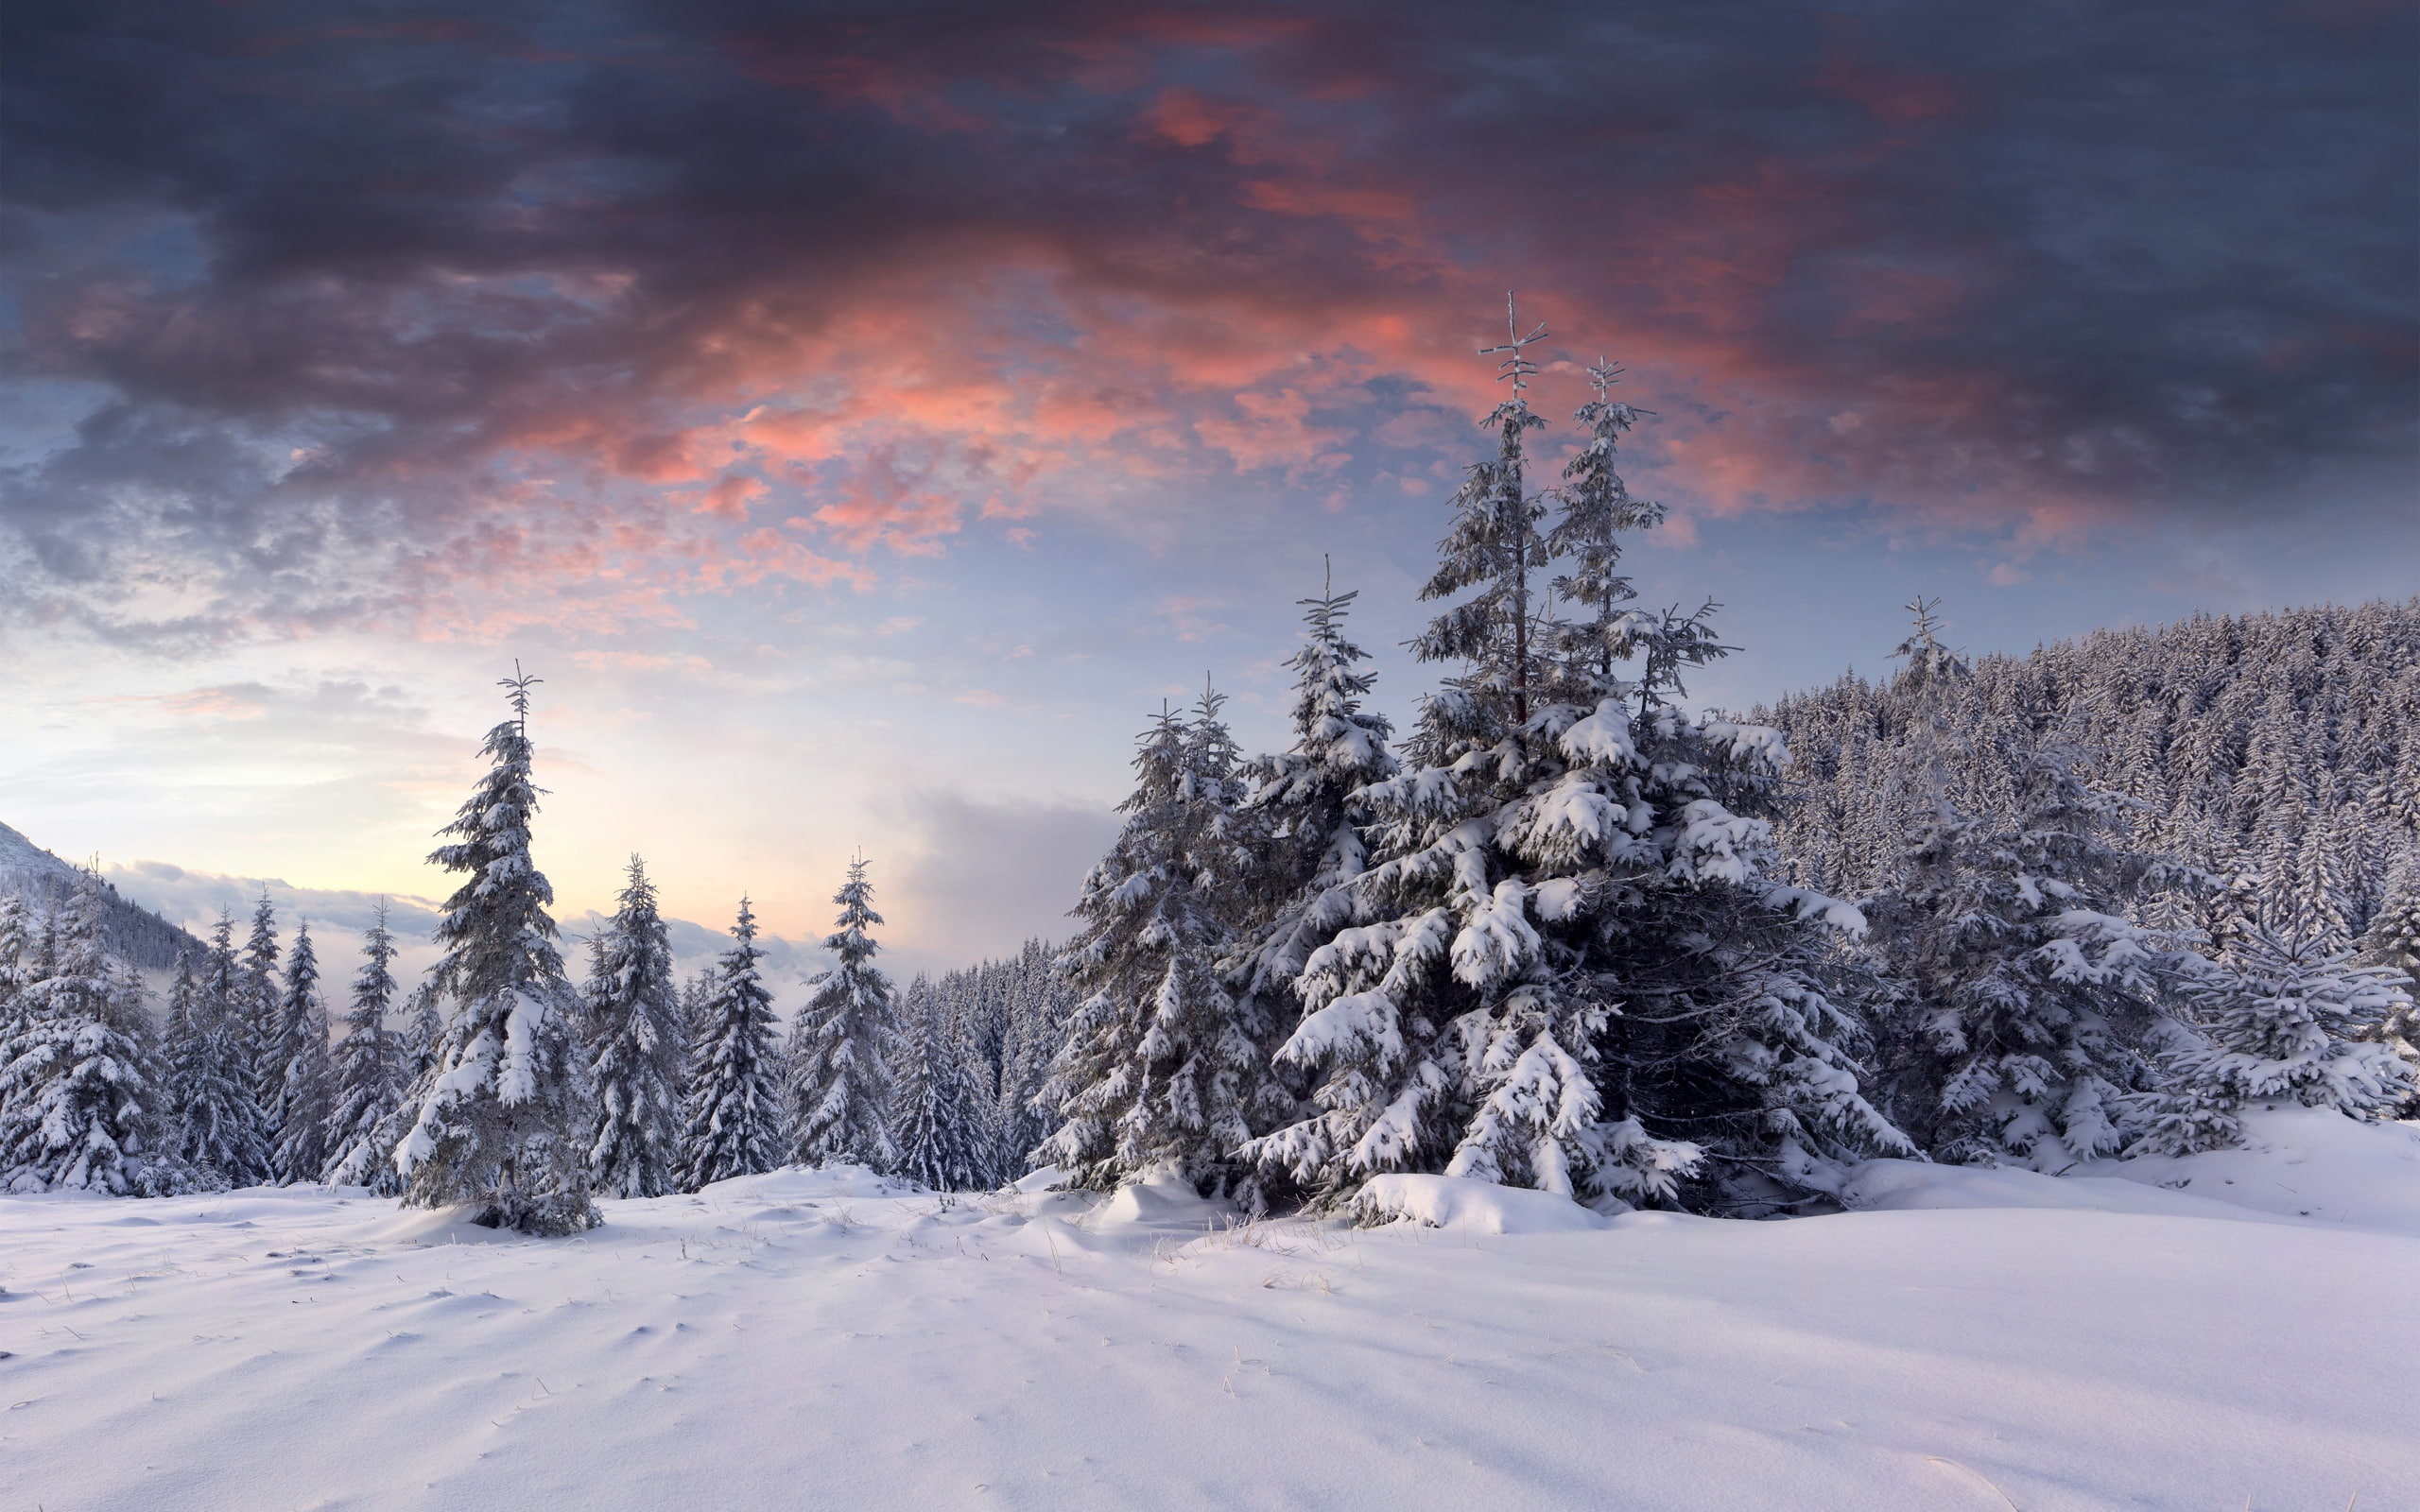 Snow, sunrise, clouds, winter, trees, forest, brown fir trees covered with snow